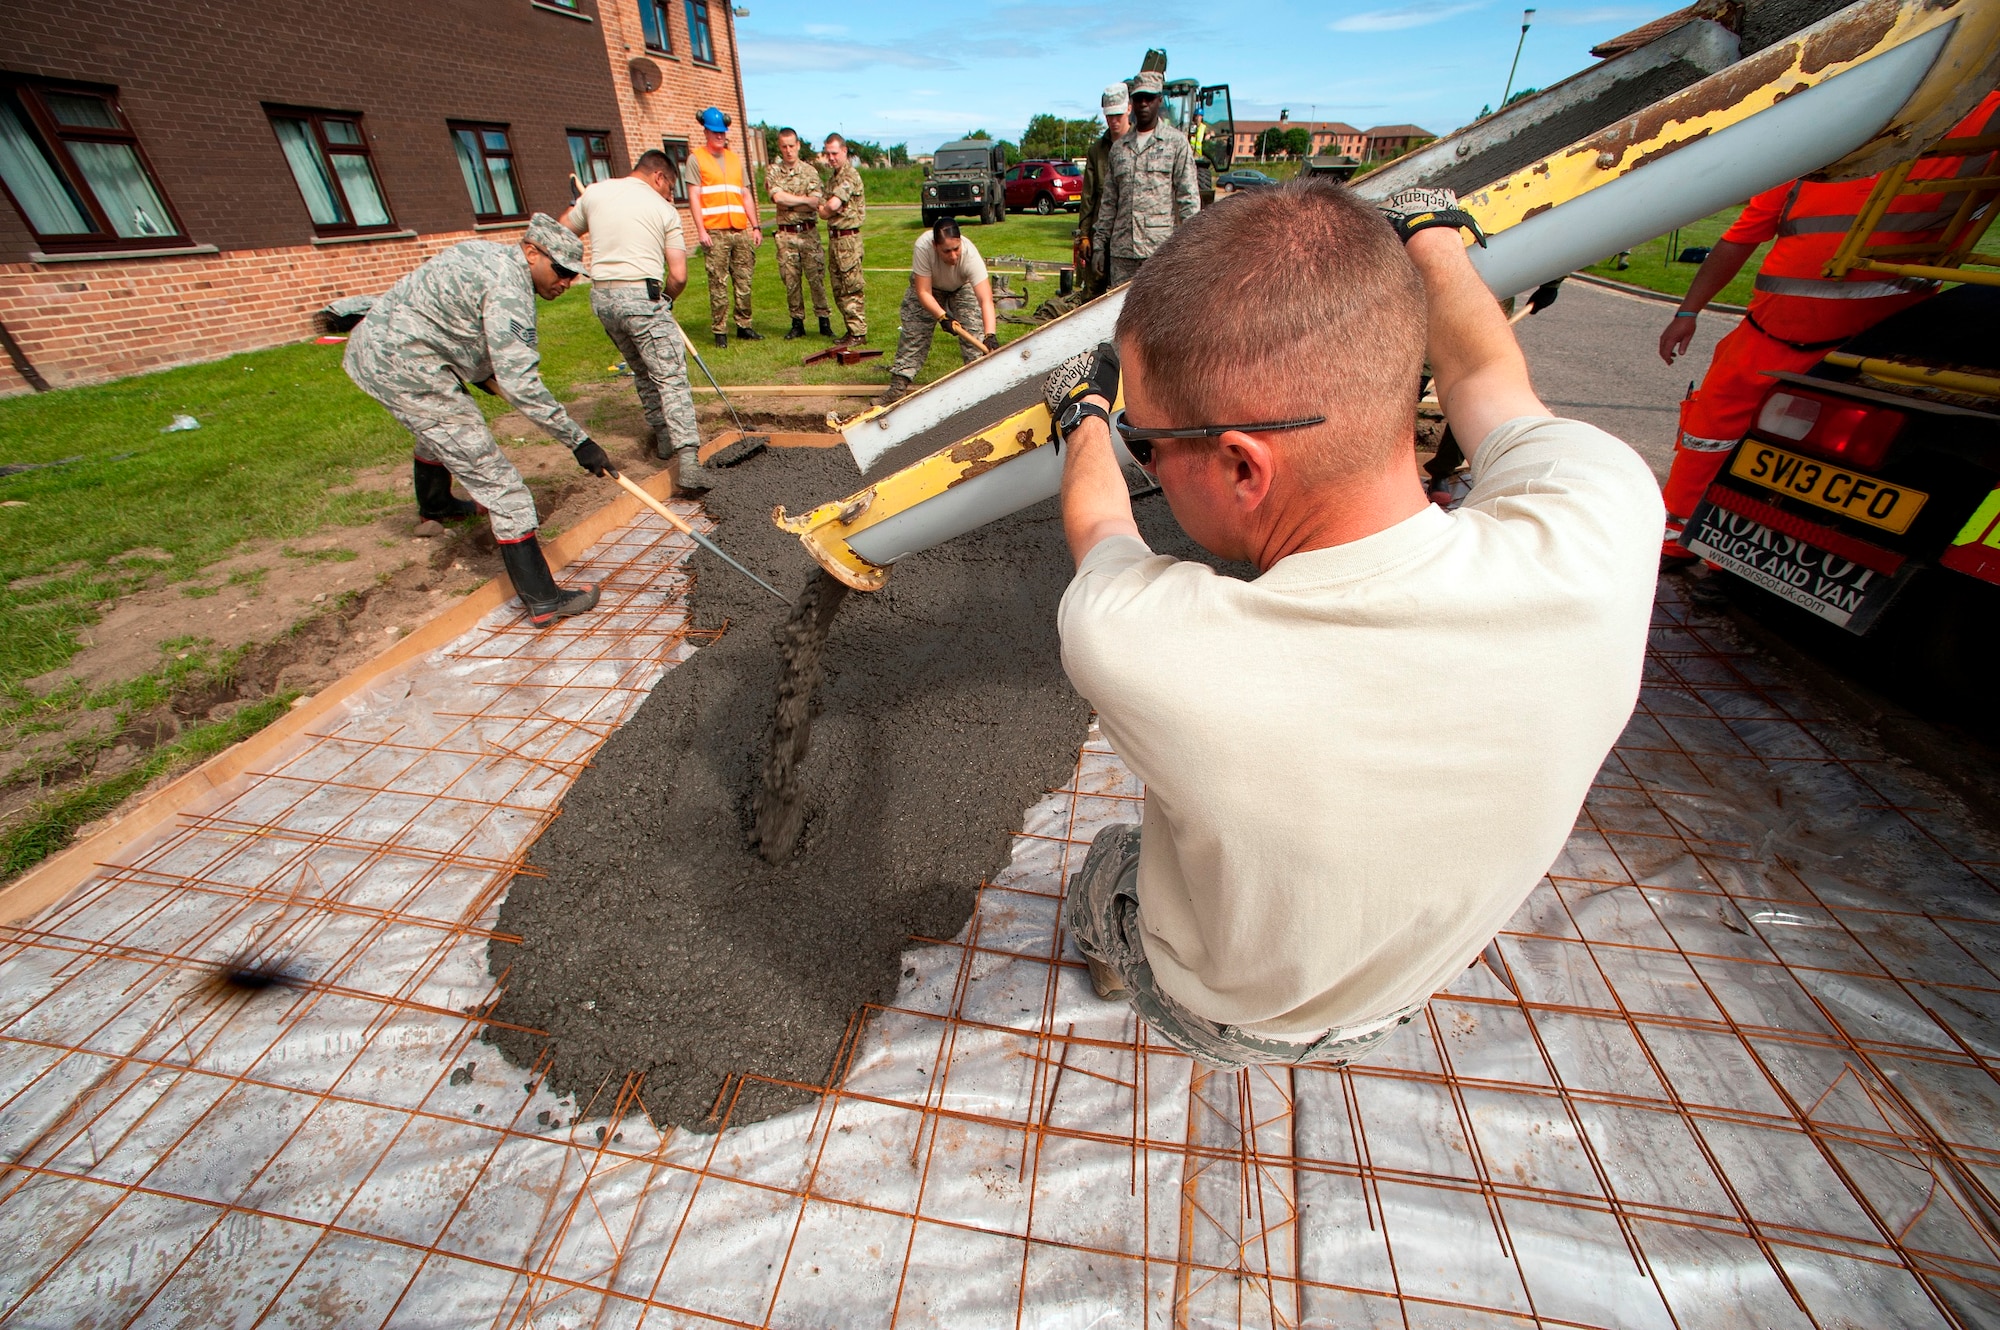 U.S. Air Force Master Sgt. Adam Elliott, 140th Civil Engineer Squadron, Colorado Air National Guard, guides fresh cement into a large space that will help to improve the base junior dorms area once completed, during a deployed for training trip, known as Exercise Flying Rose at Kinloss Barrack in Forres, Moray, Scotland, United Kingdom, Jun. 16, 2014. Over 40 members of the 140th CES are in Scotland for their annual training and are accomplishing five construction projects that will improve several areas around Kinloss Barracks, during Exercise Flying Rose hosted by the British Army before returning back to Colorado later this month. (U.S. Air National Guard photo byTech. Sgt. Wolfram M. Stumpf)